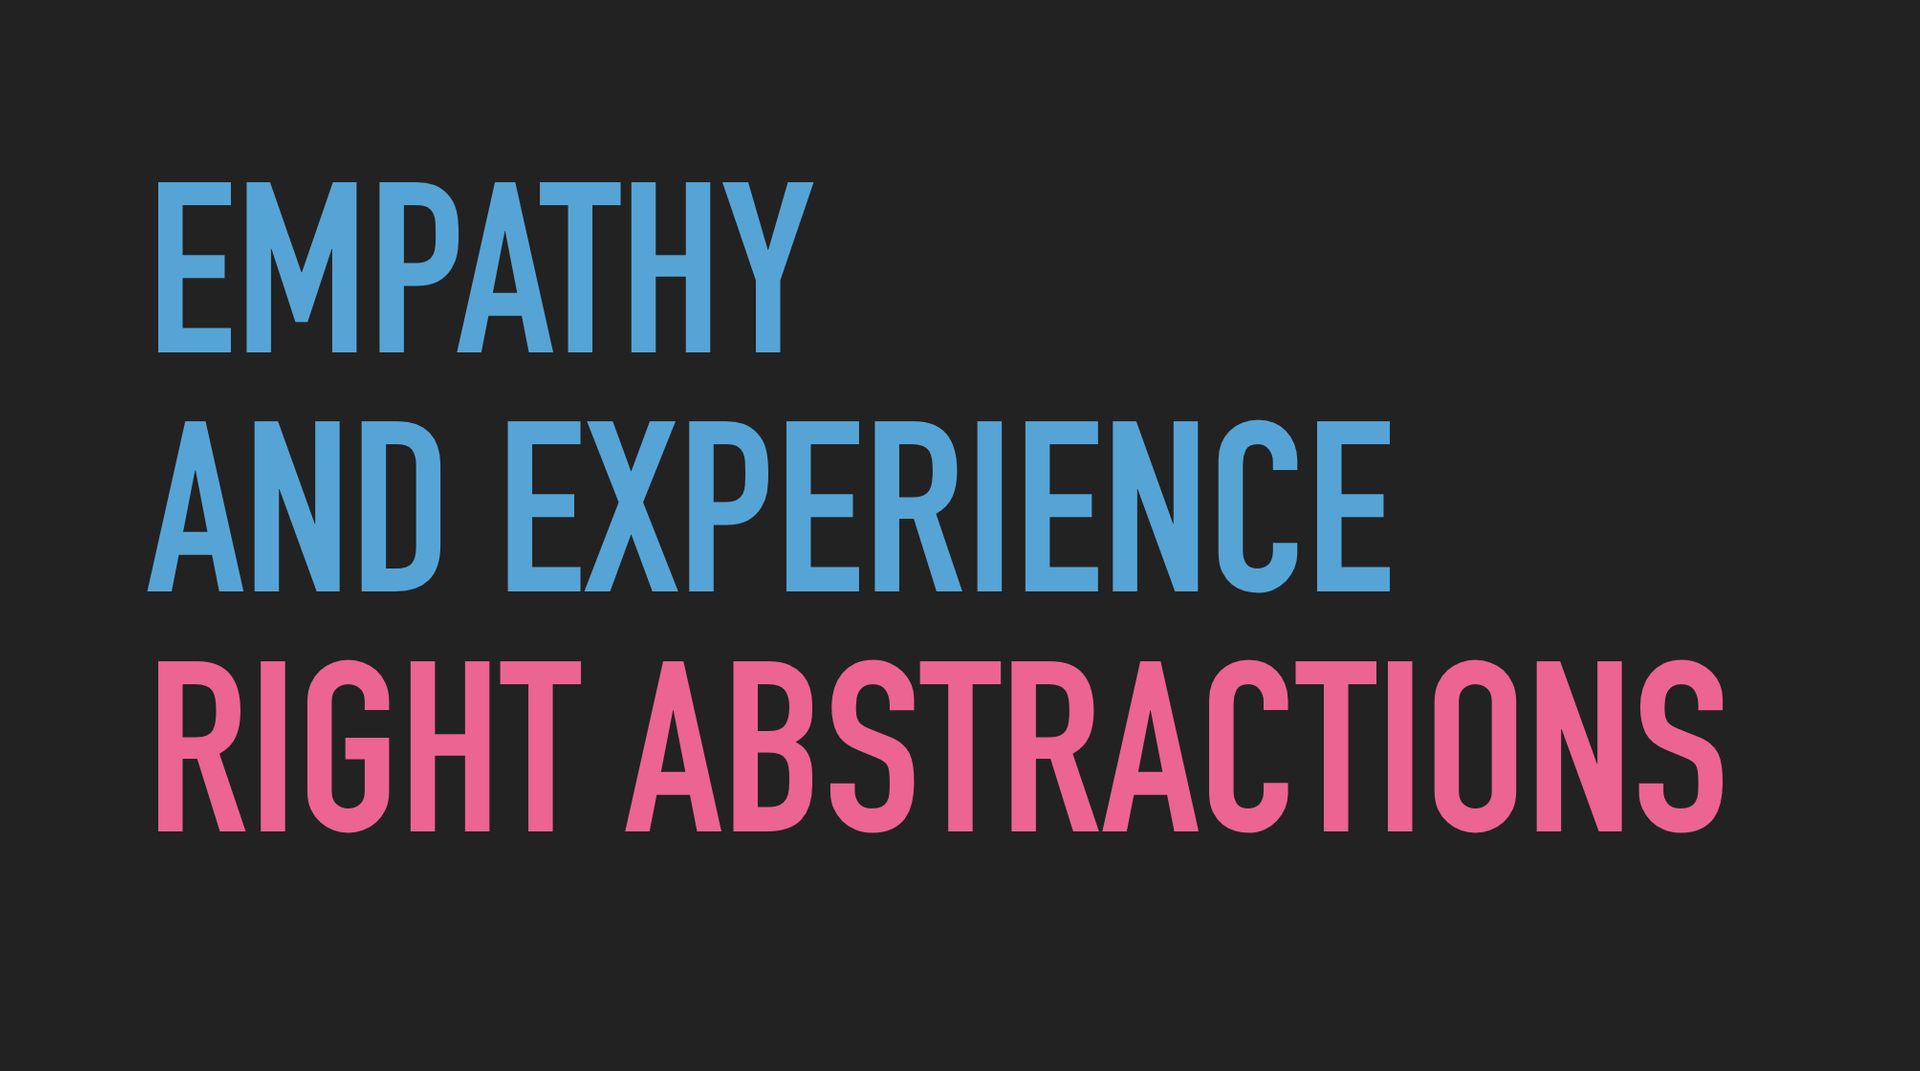 Slide text: Empathy and experience -> Right abstractions.